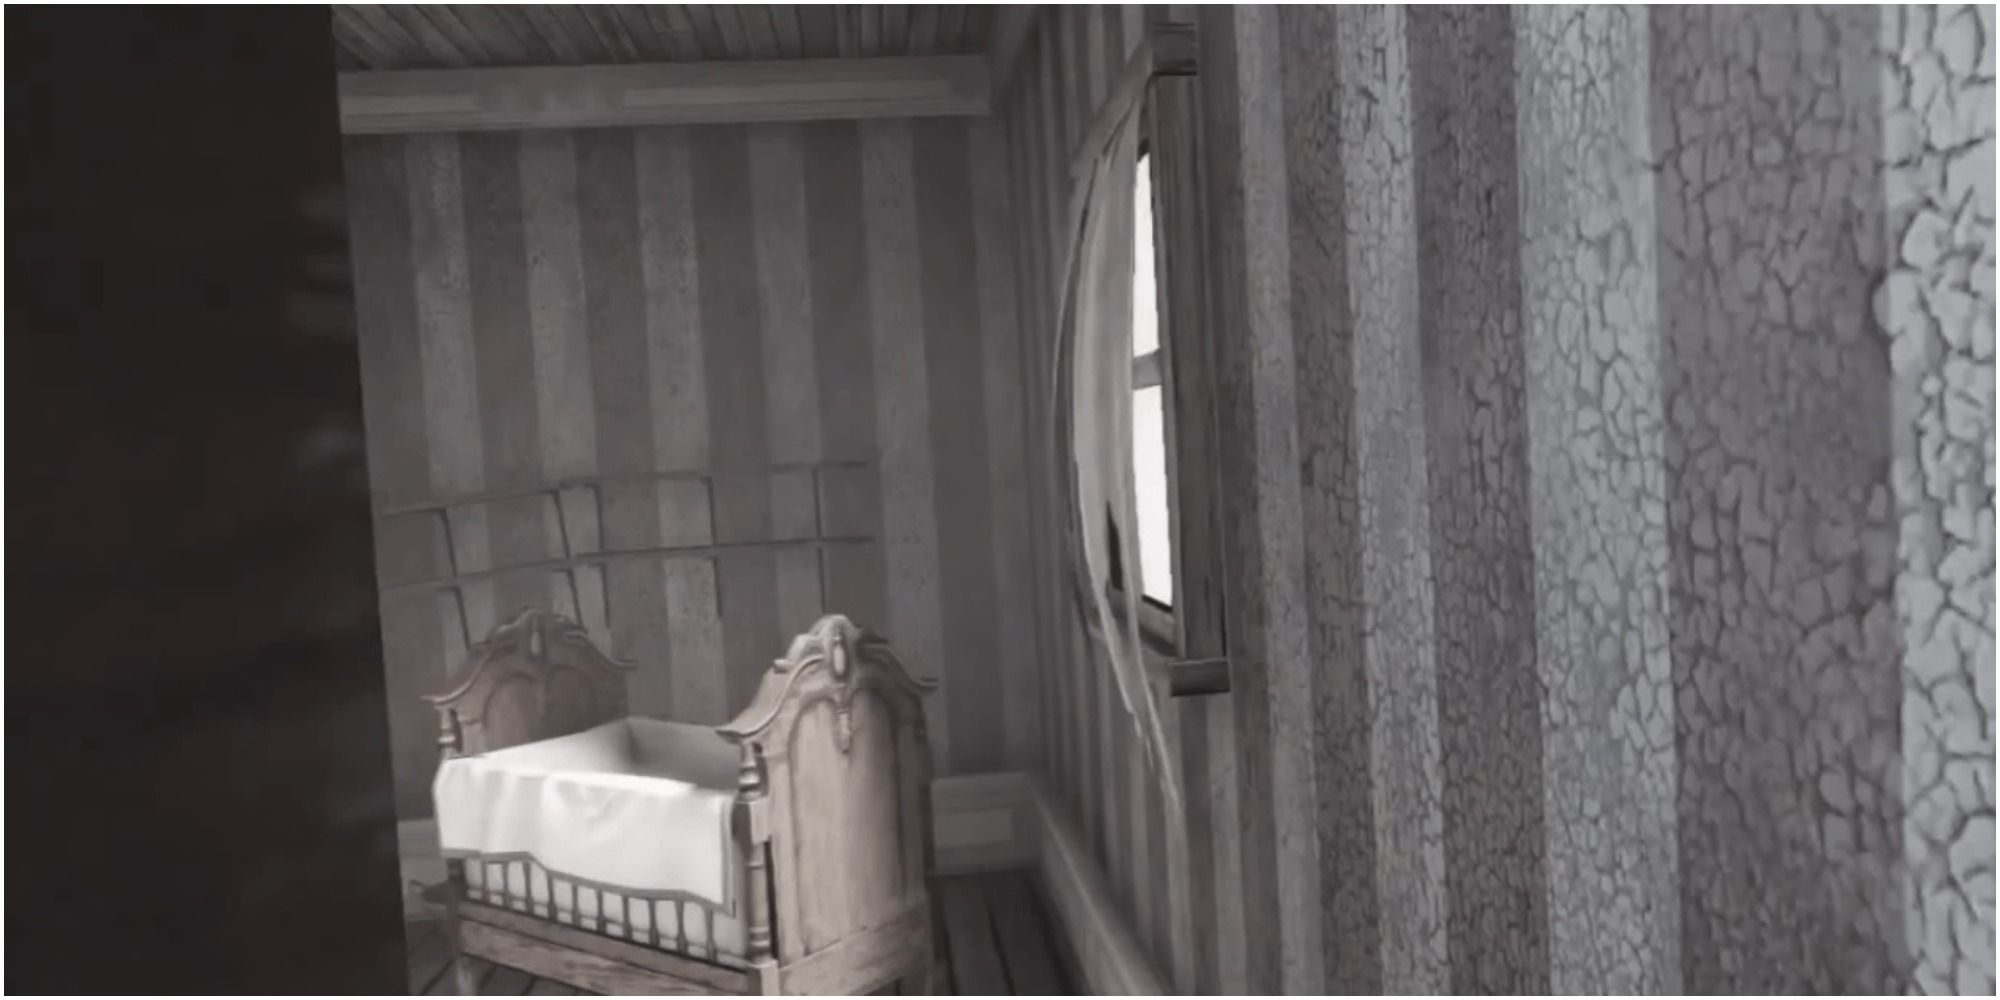 Bioshock Infinite's after credits scene, featuring a crib in a side room of Booker's office